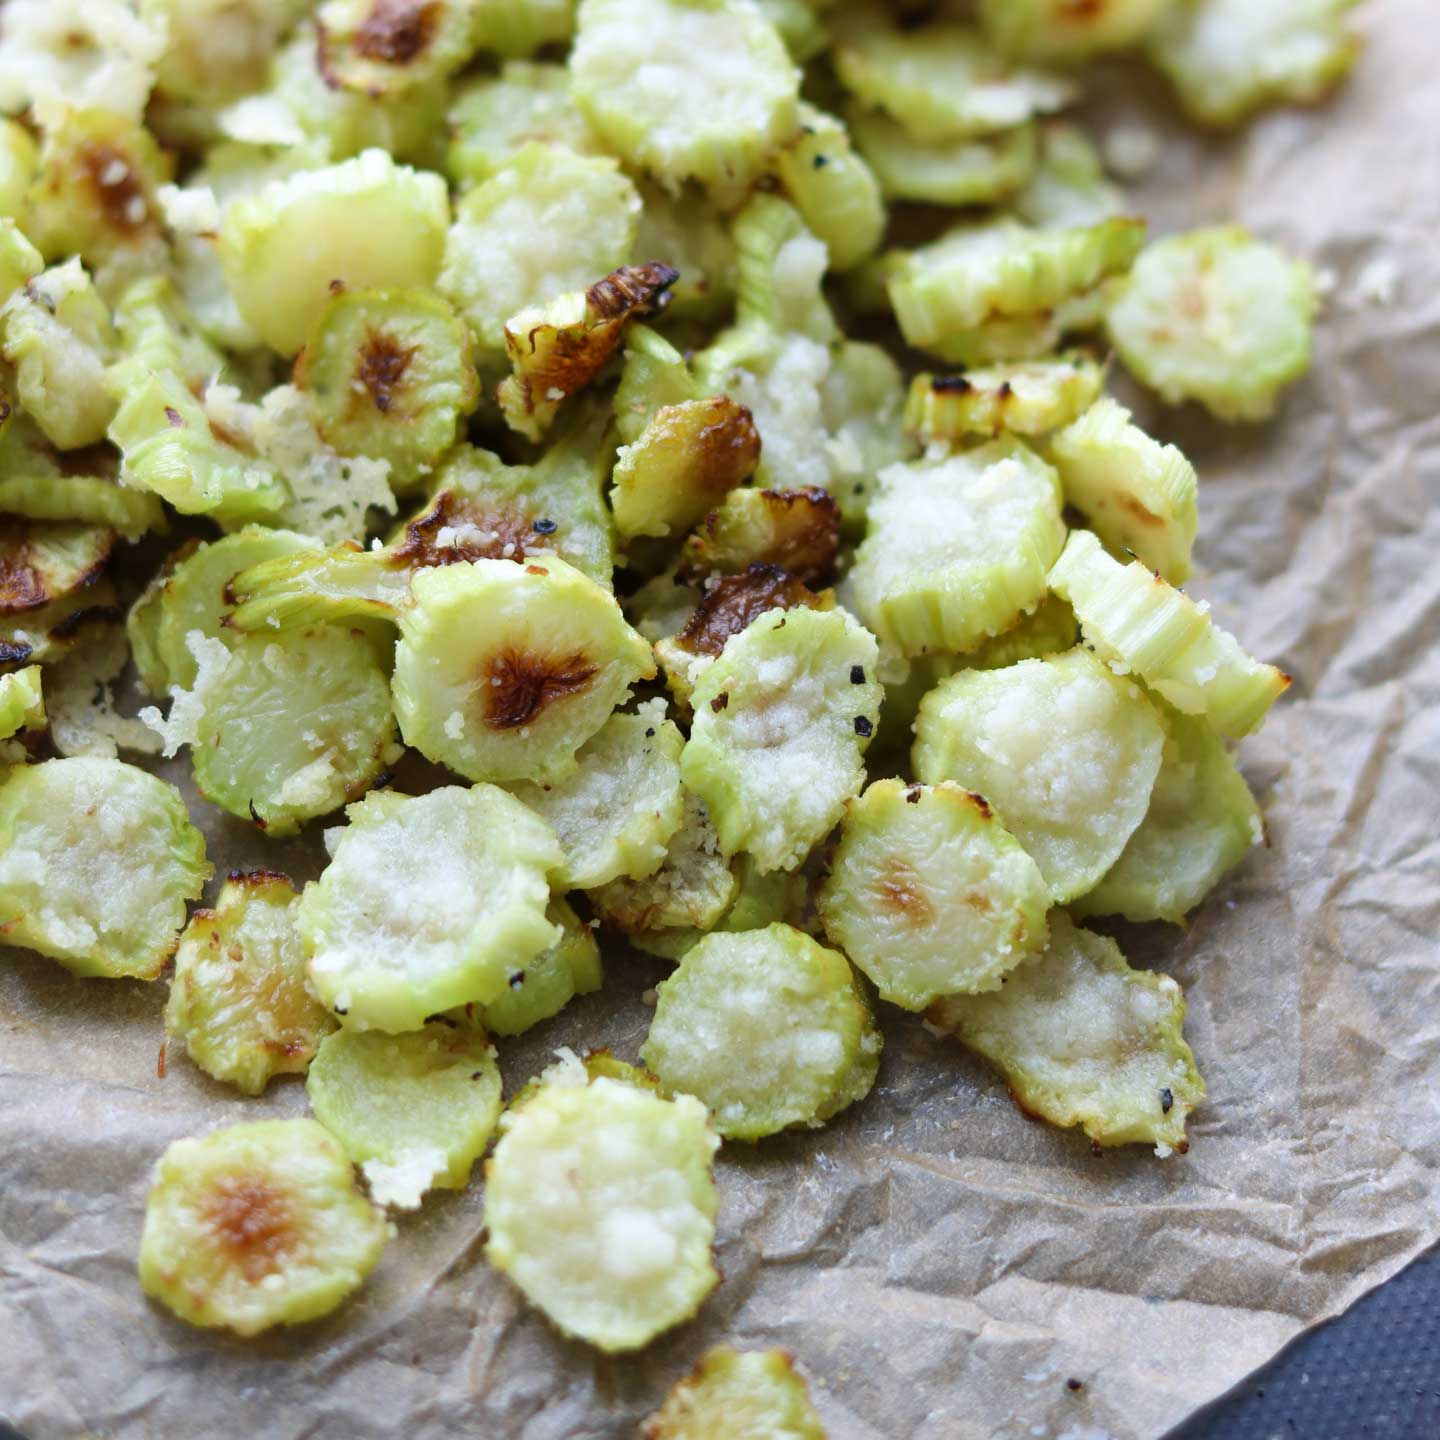 This is a great snack recipe, and also a perfect easy side dish recipe!